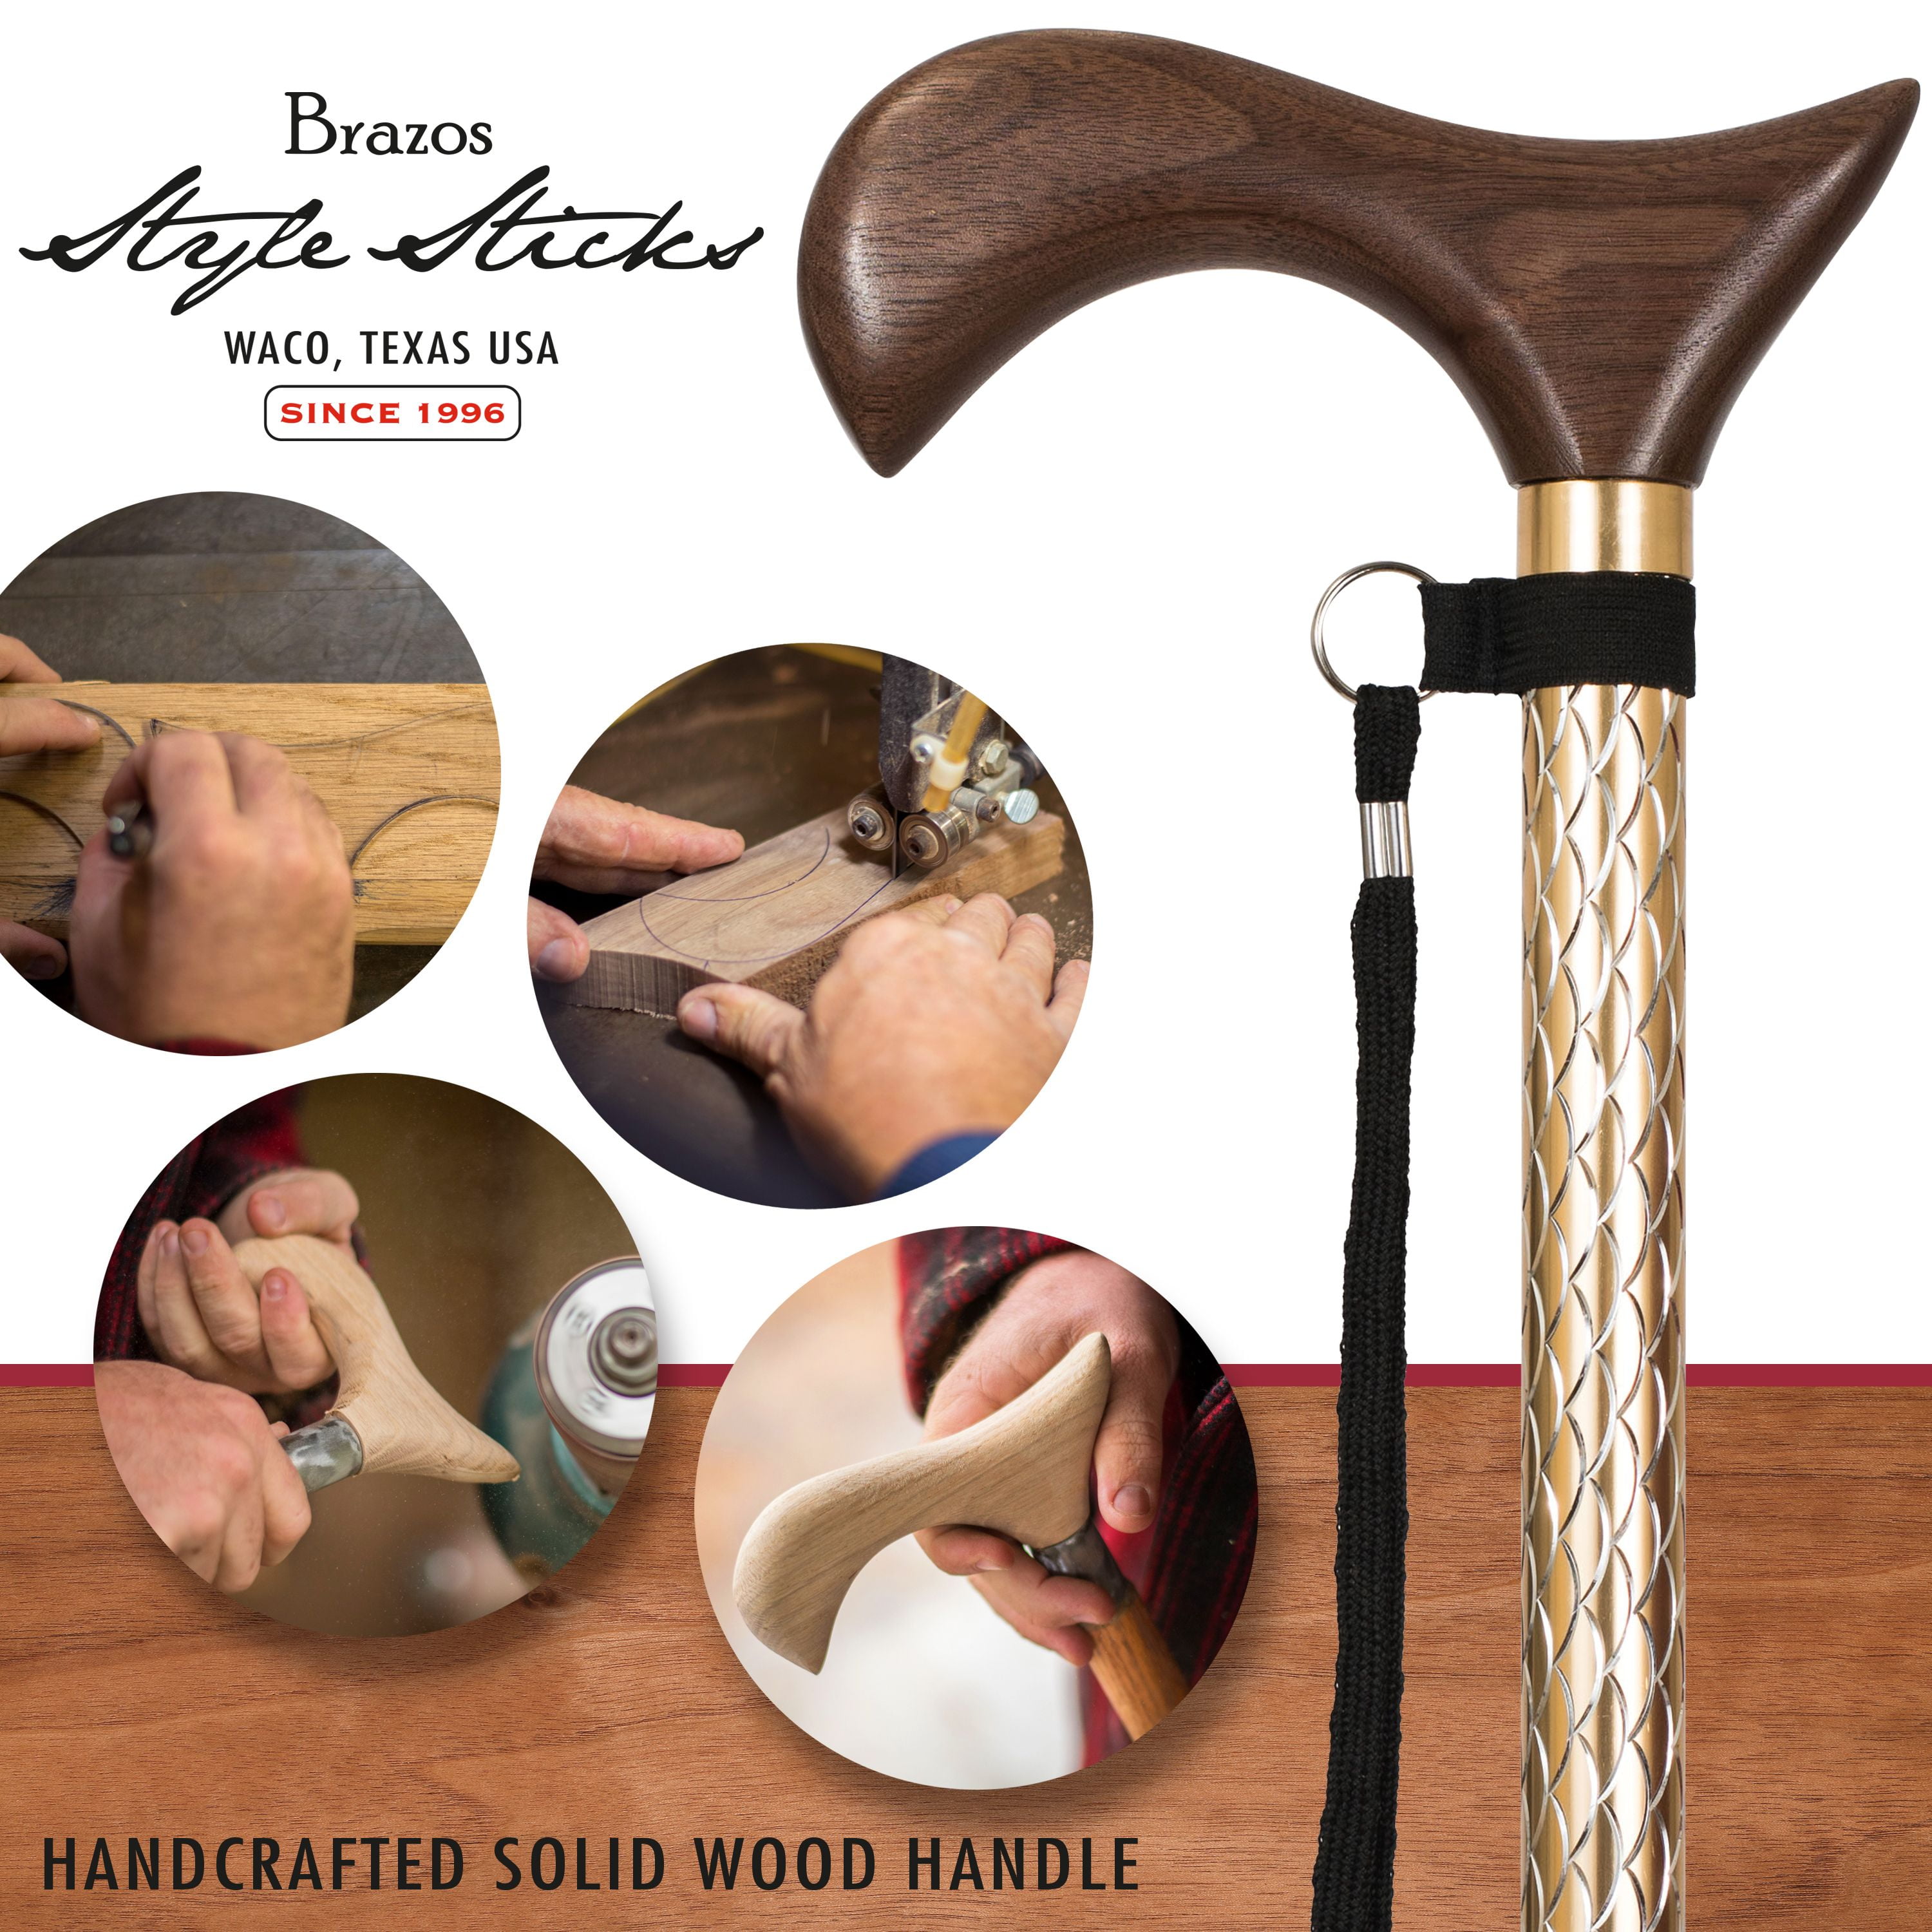 Brazos Adjustable Walking Cane for Men and Women Made of